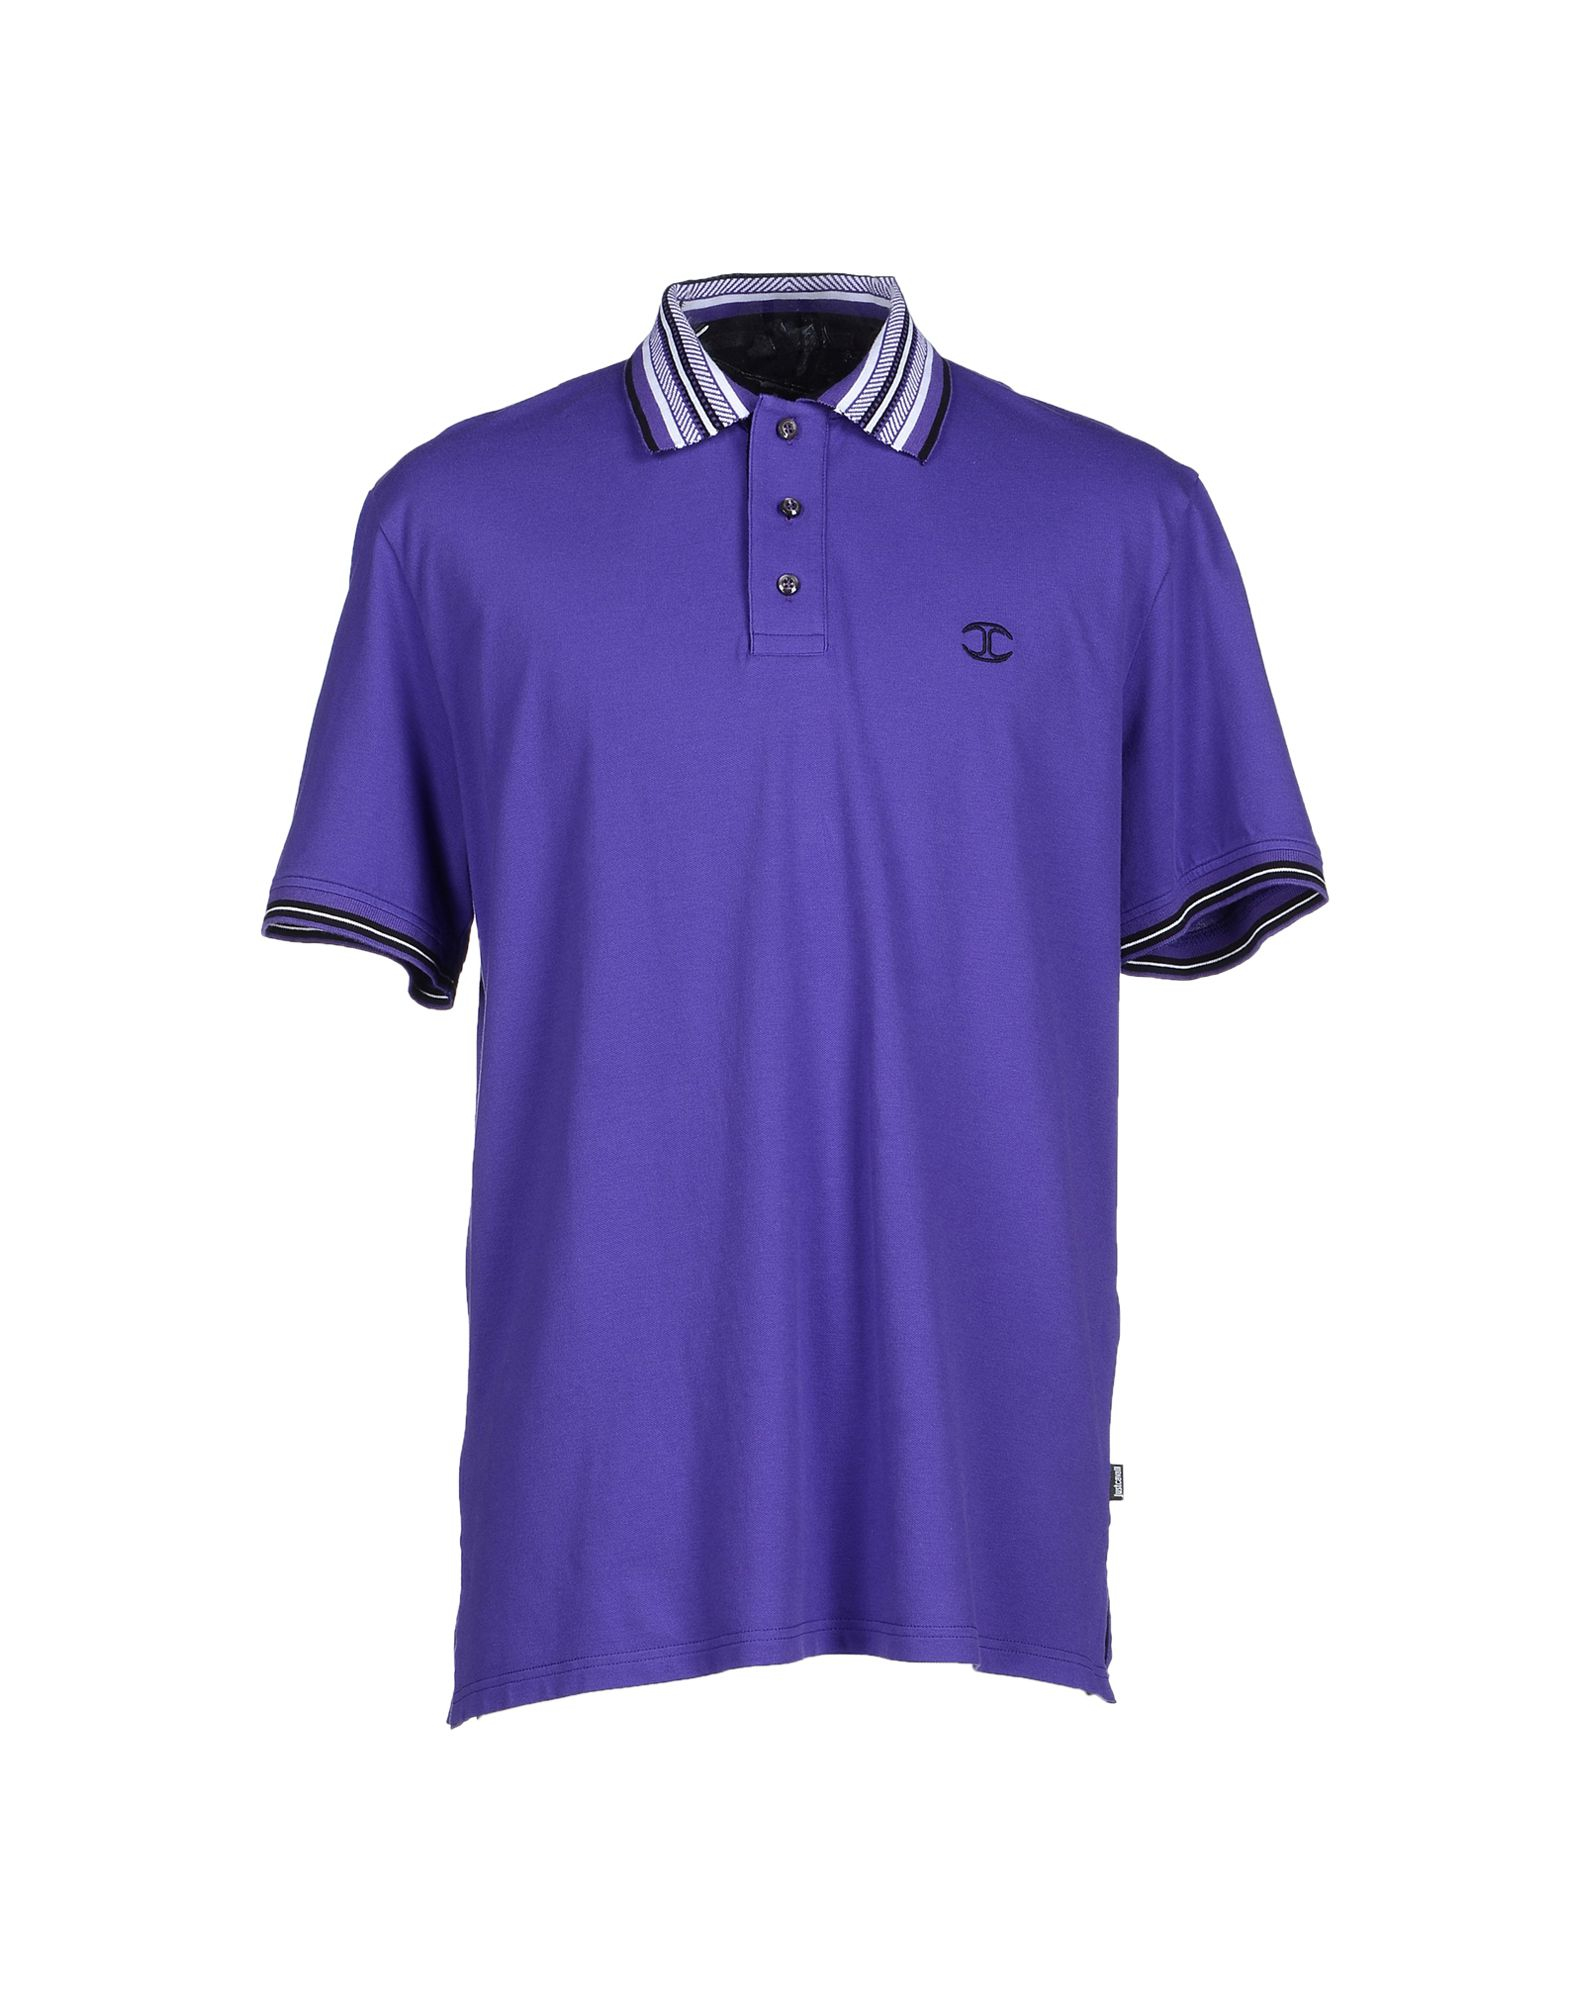 Lyst - Just Cavalli Polo Shirt in Purple for Men